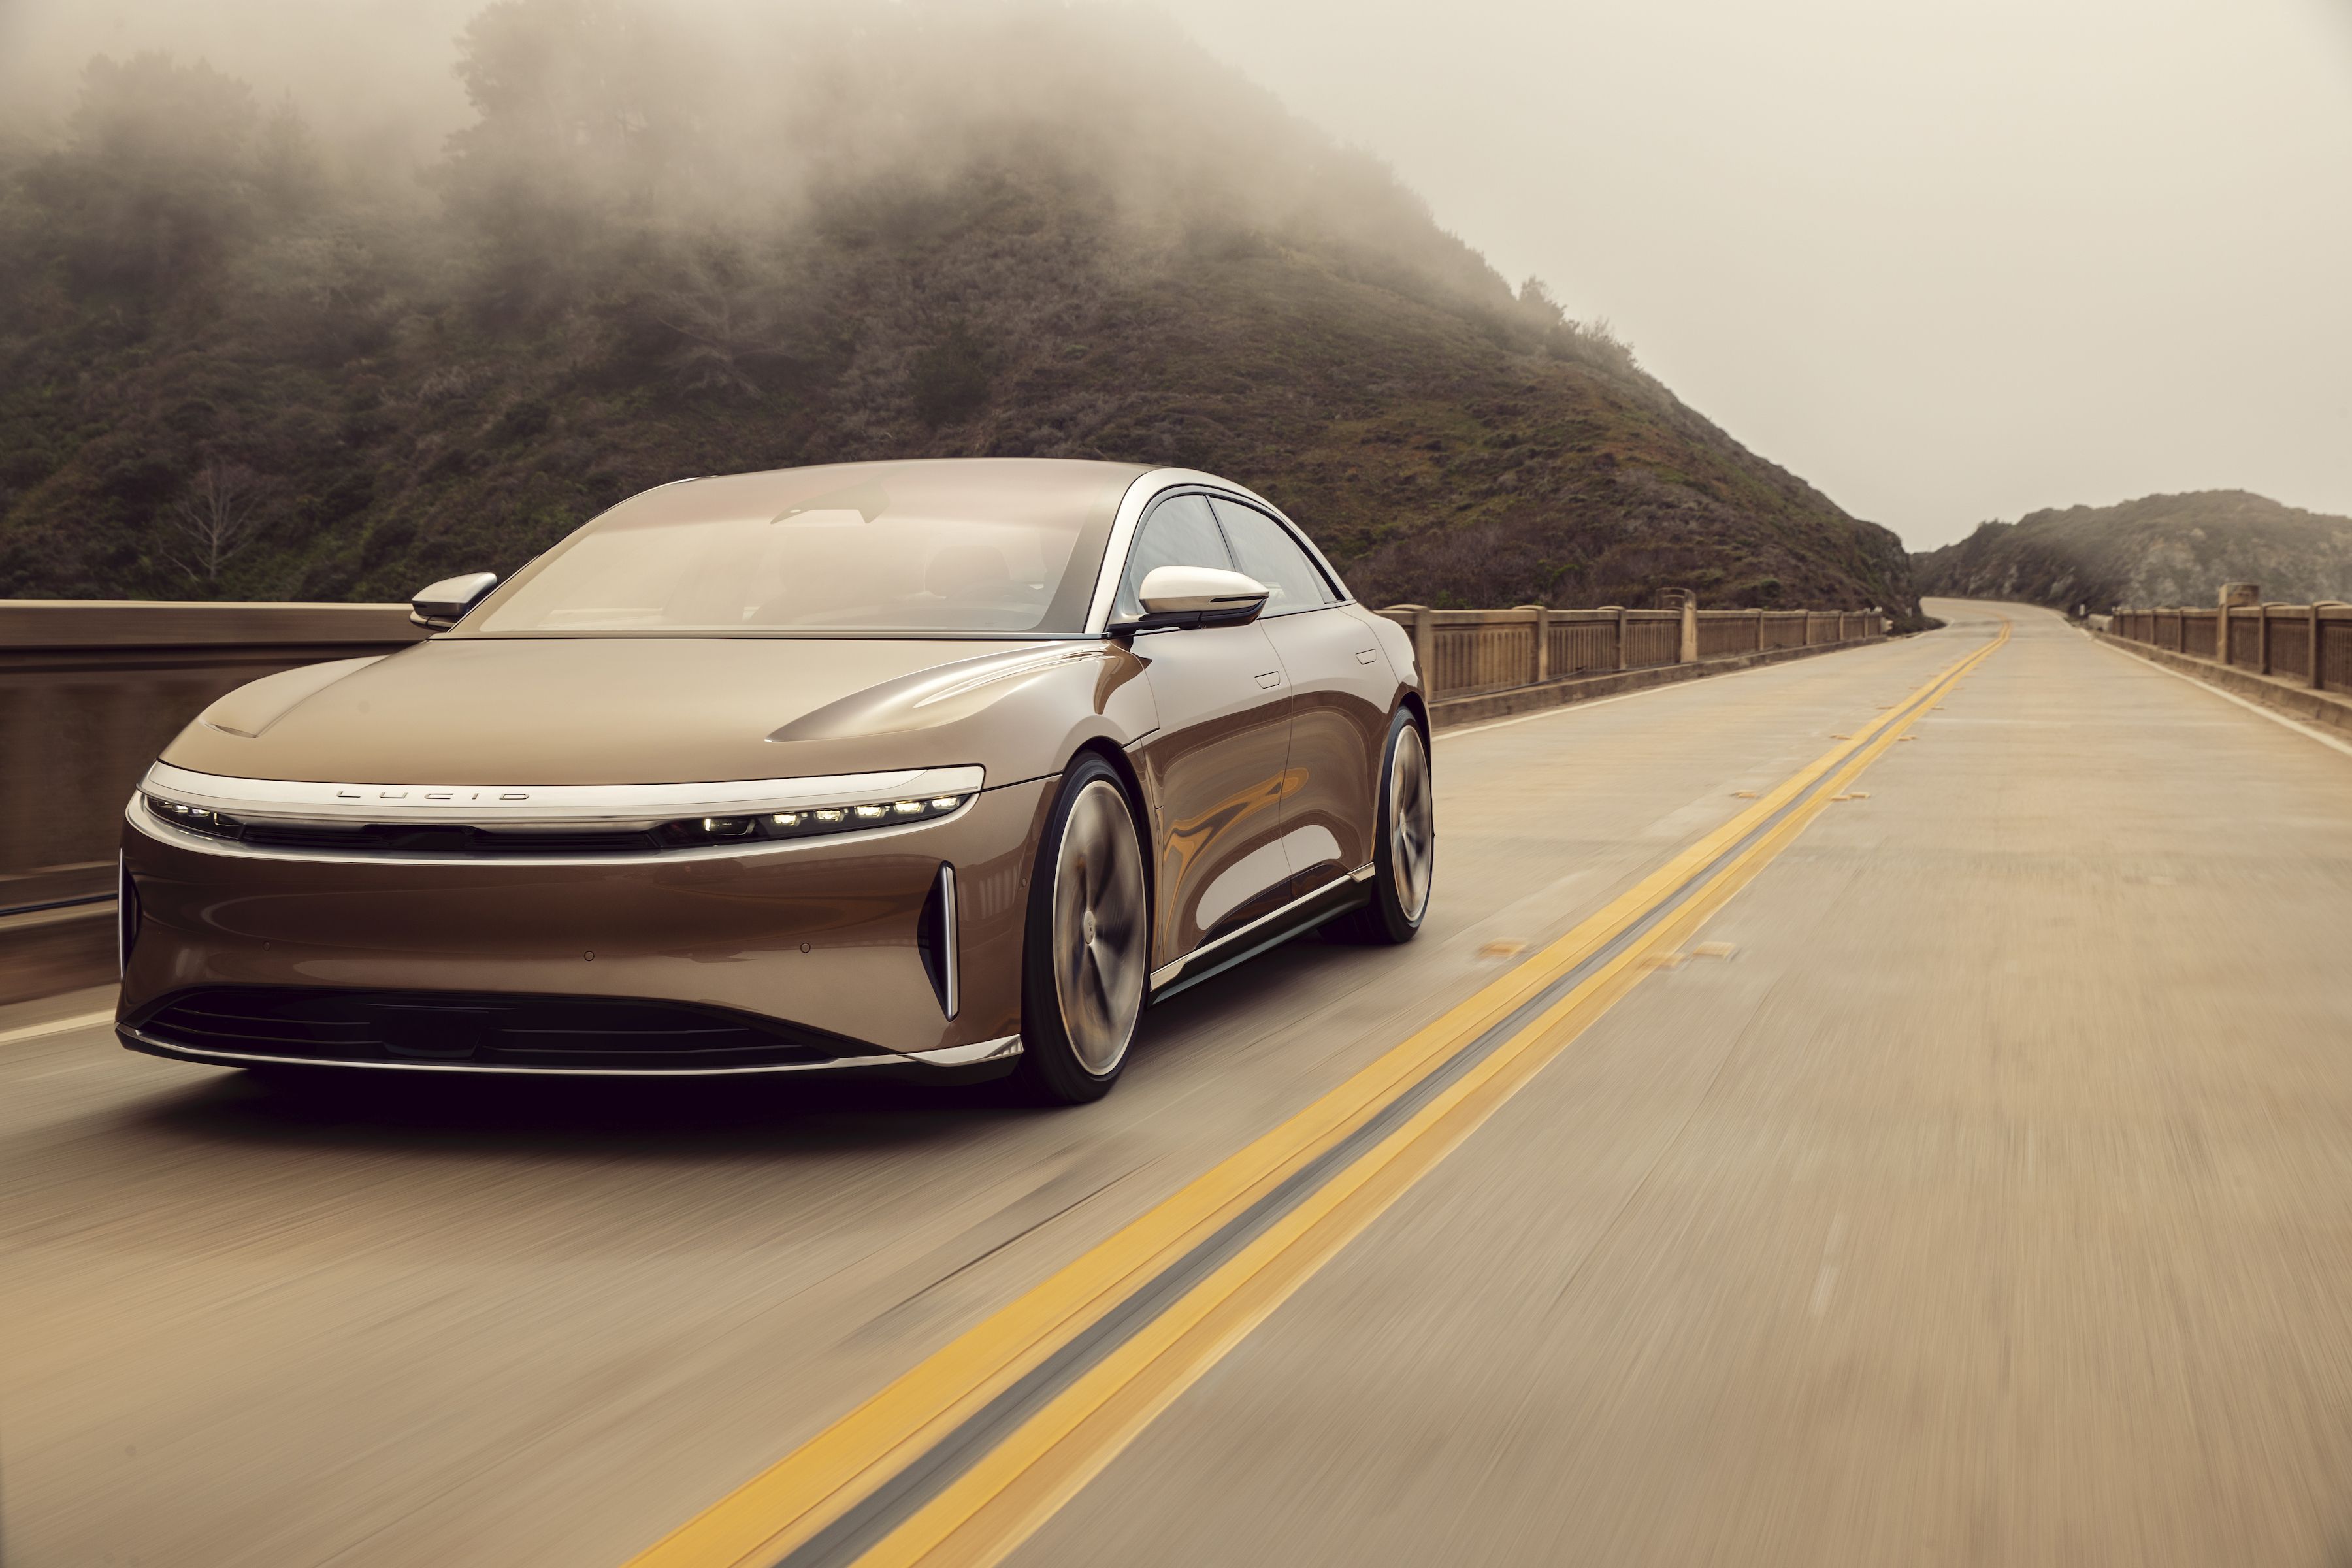 lucid air release date